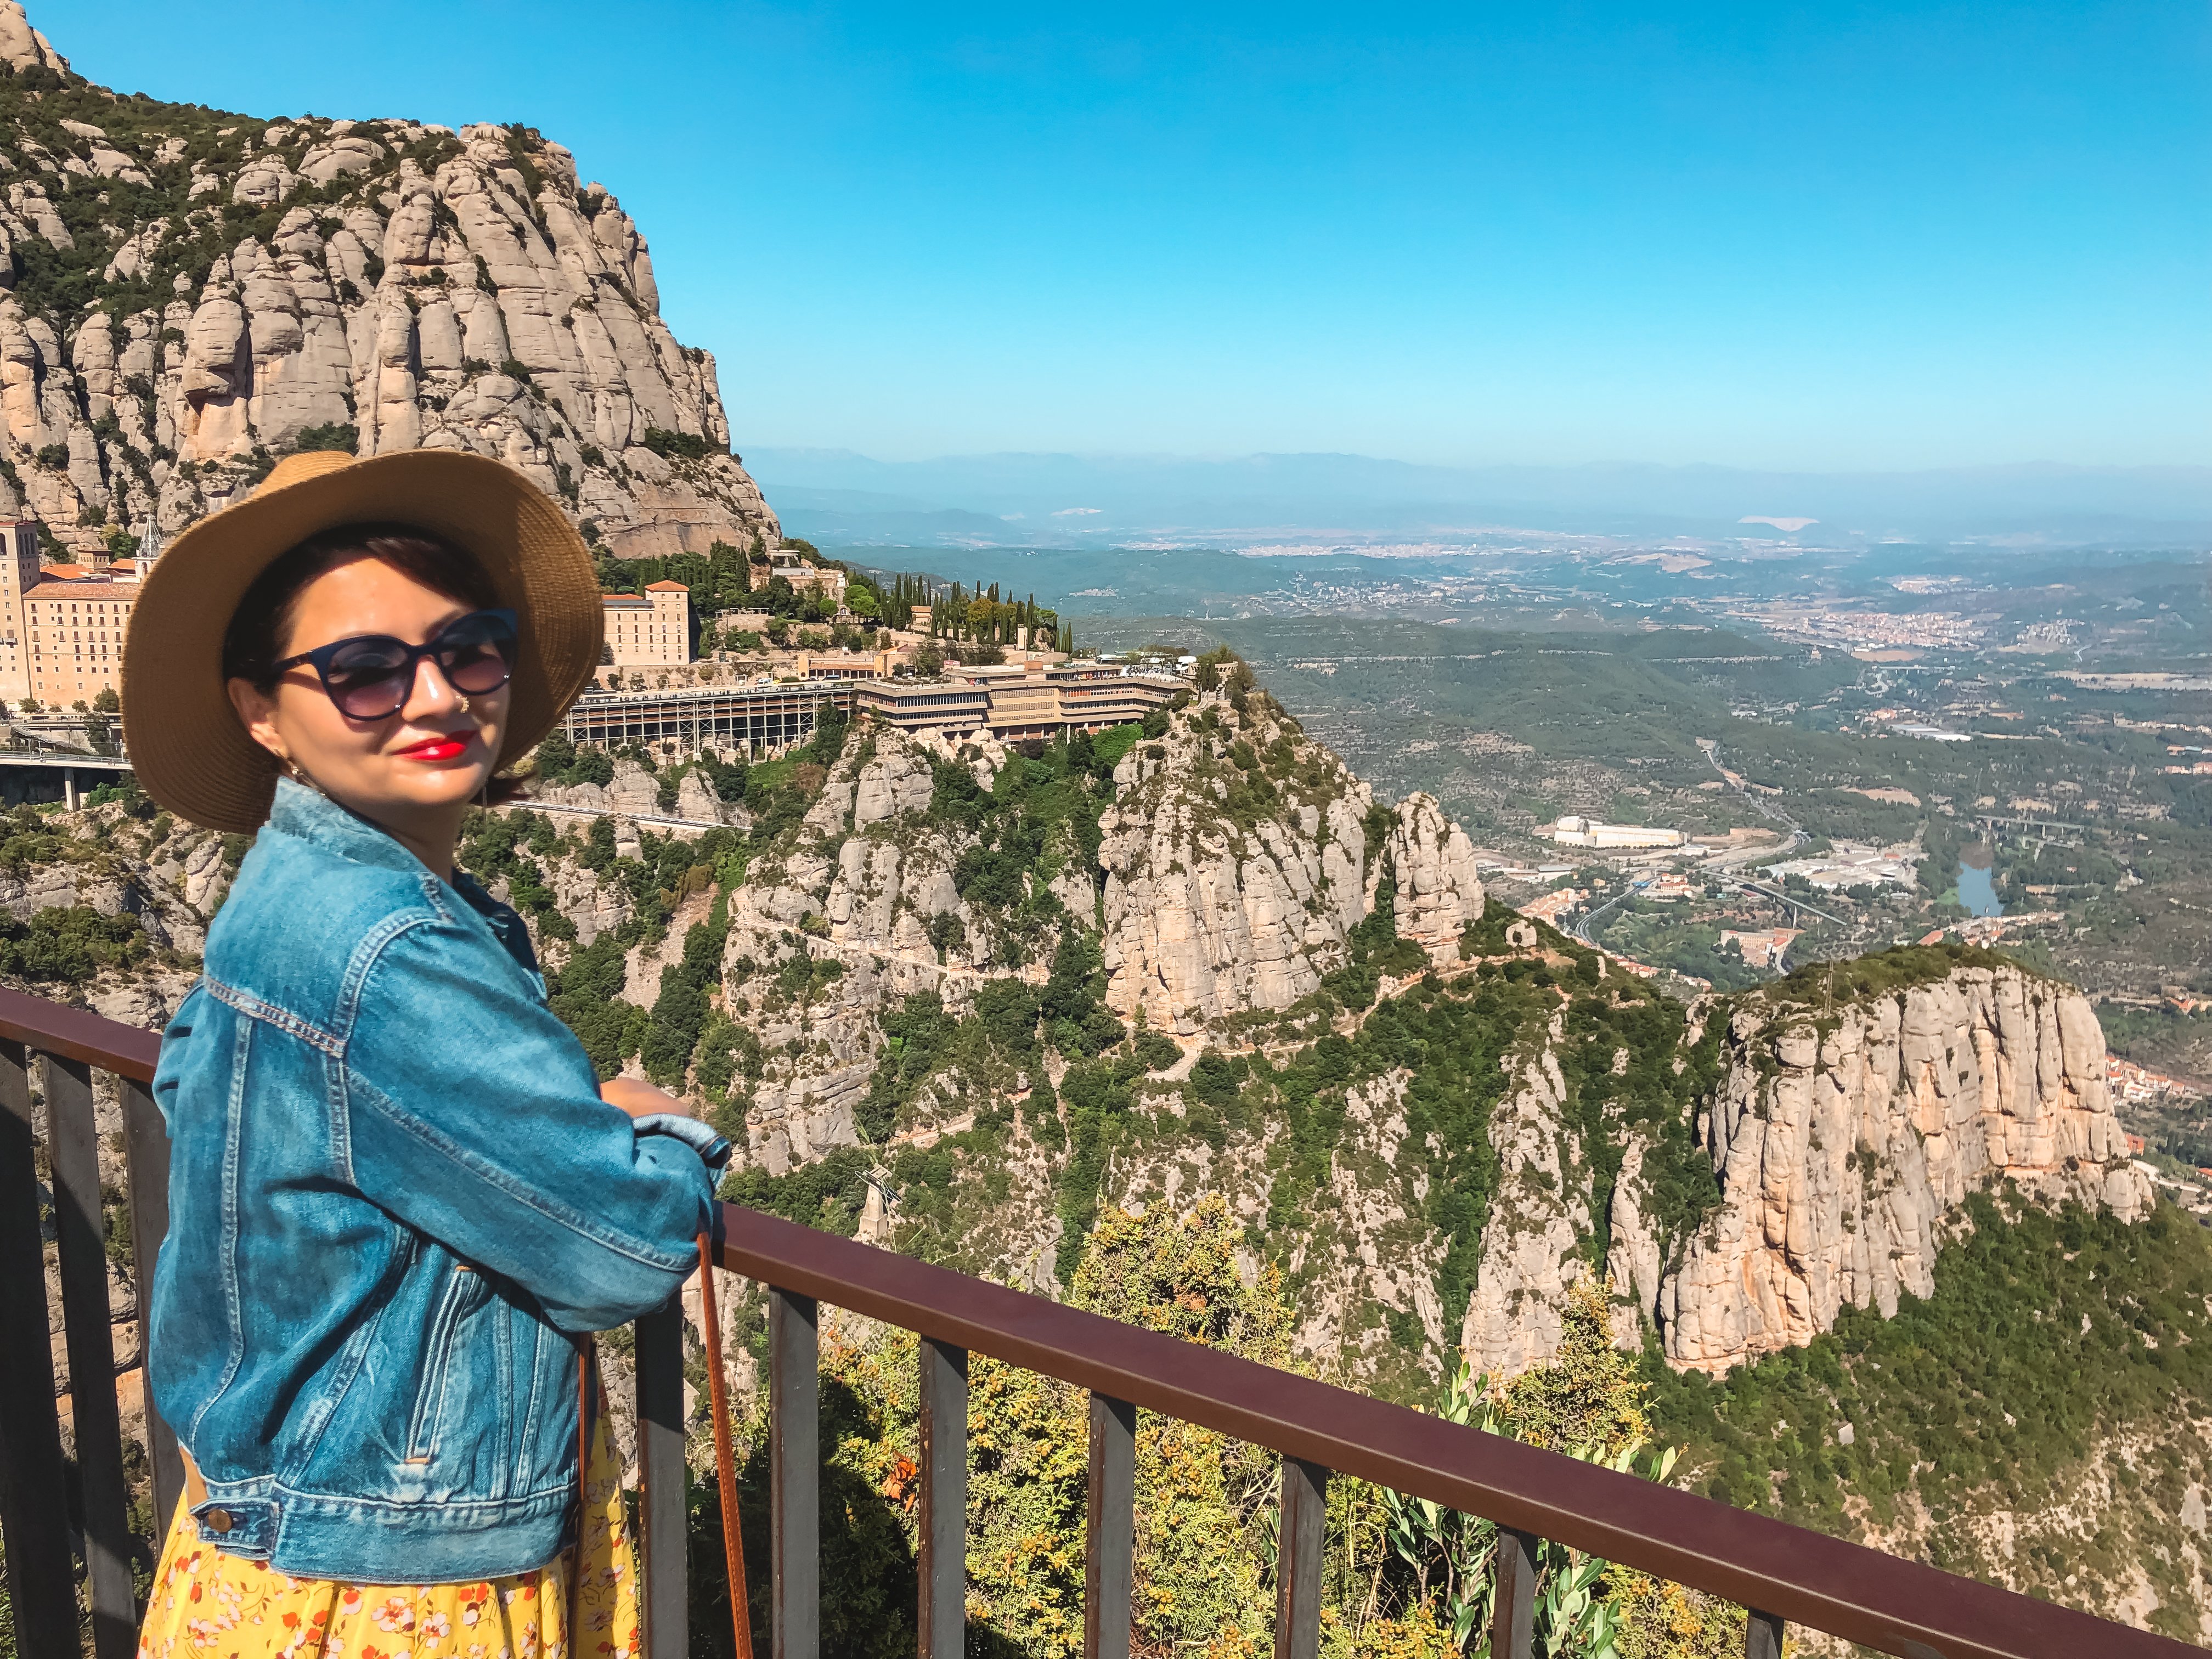 Muslim travel blogger looking out over Montserrat